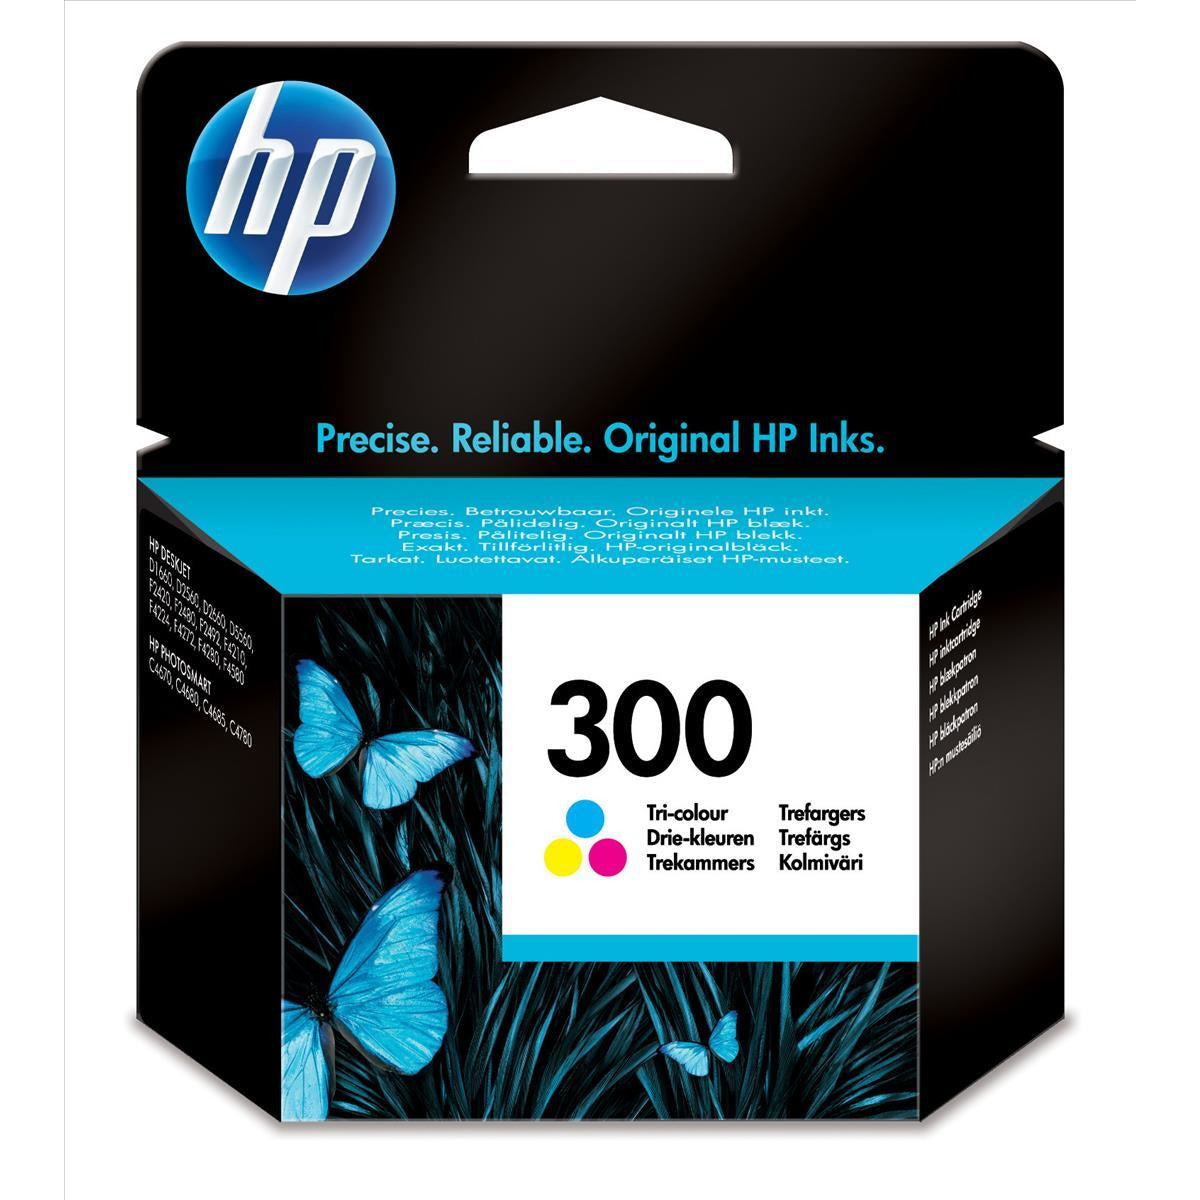 HP 300 (Yield: 165 Pages) Cyan/Magenta/Yellow Ink Cartridge